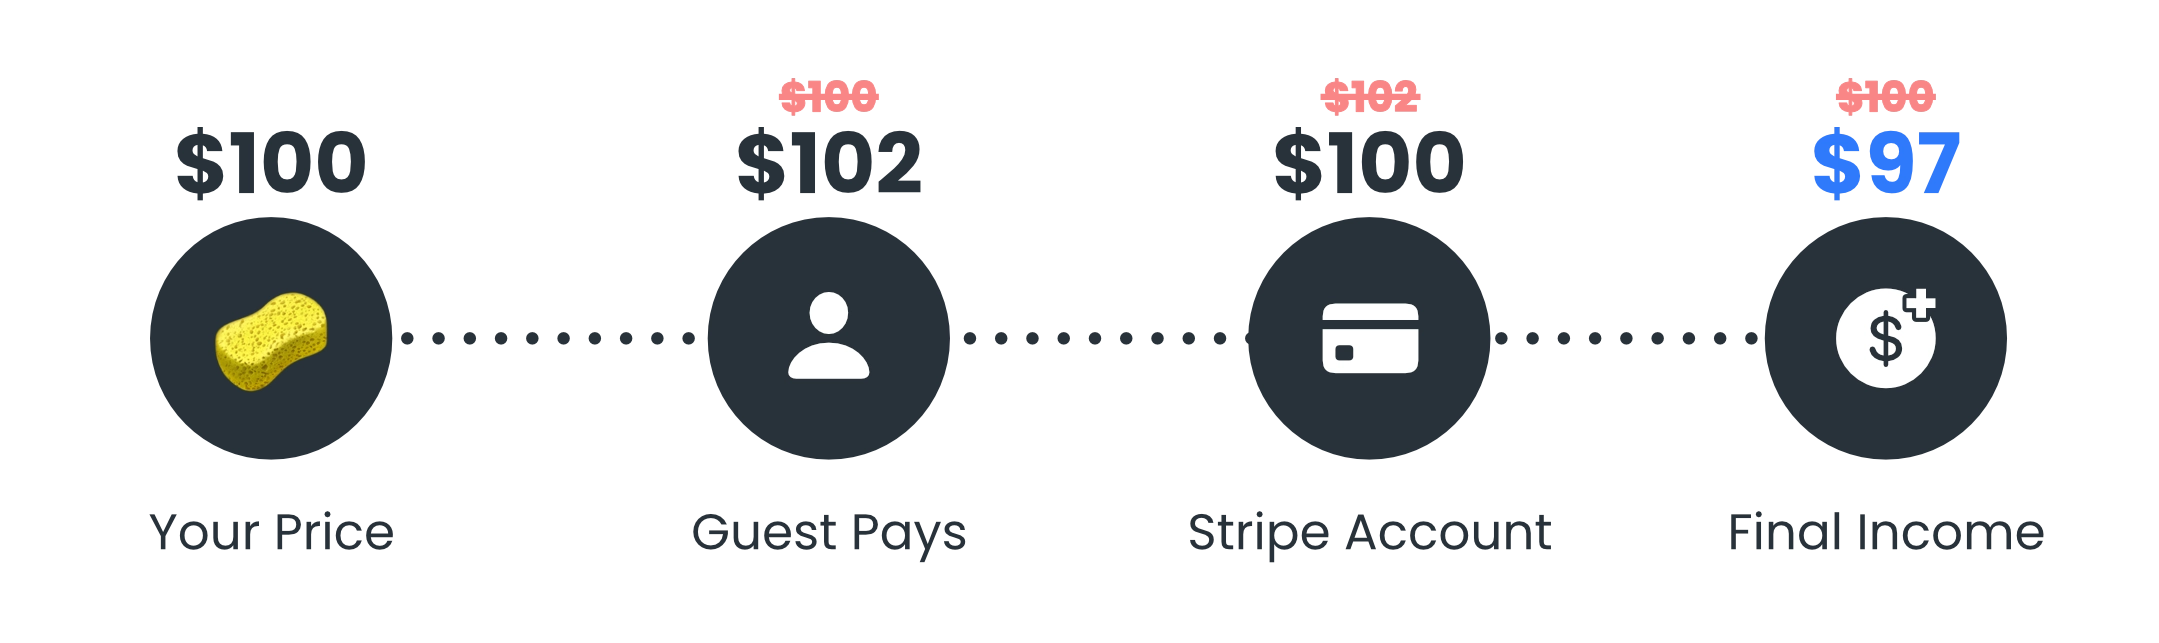 Upsells payment structure